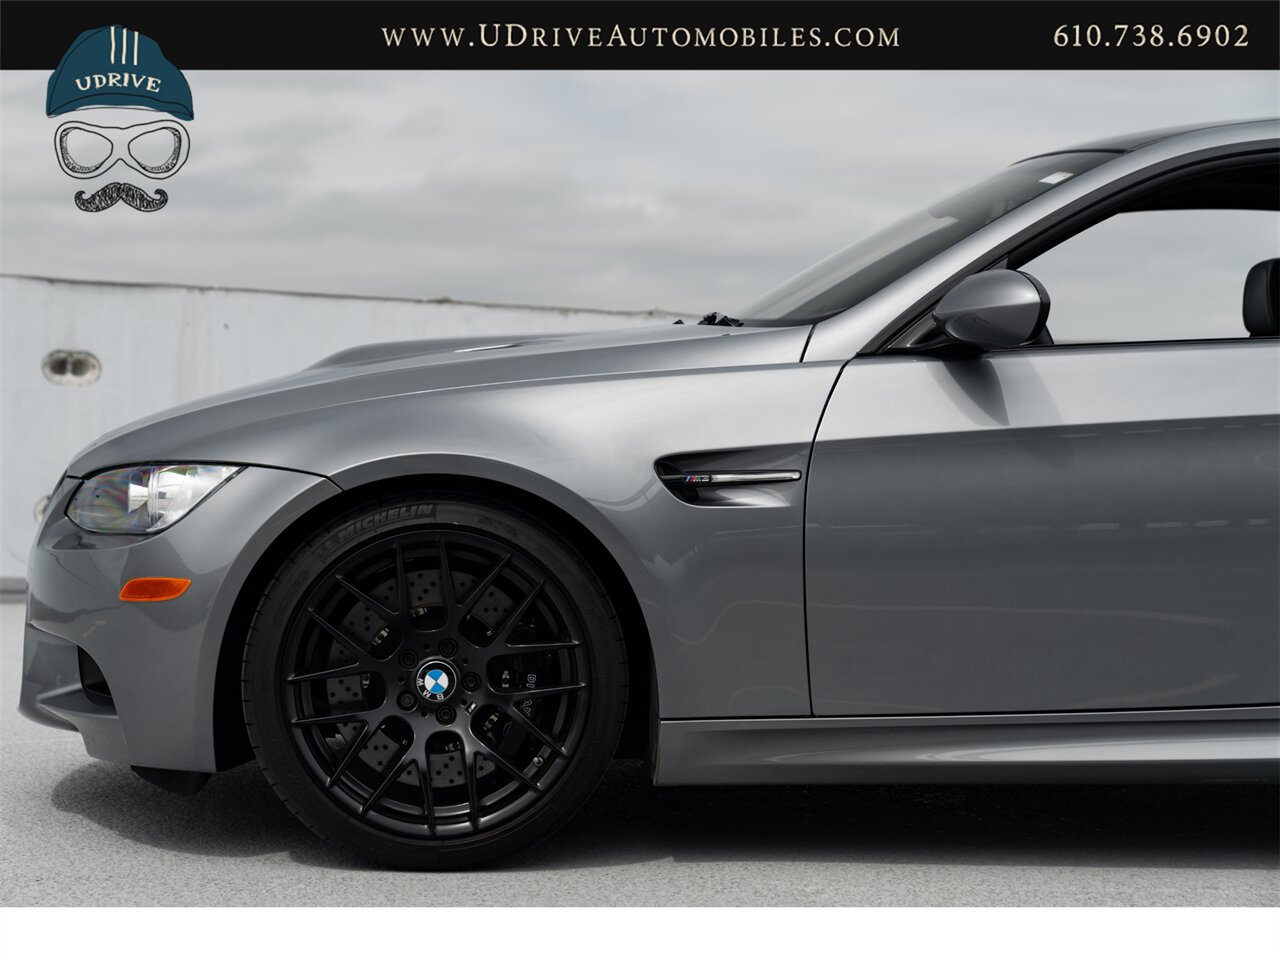 2012 BMW M3 E92 6 Speed 7k Miles Dinan Upgrades  GTS/359 Wheels Carbon Fiber Roof - Photo 9 - West Chester, PA 19382